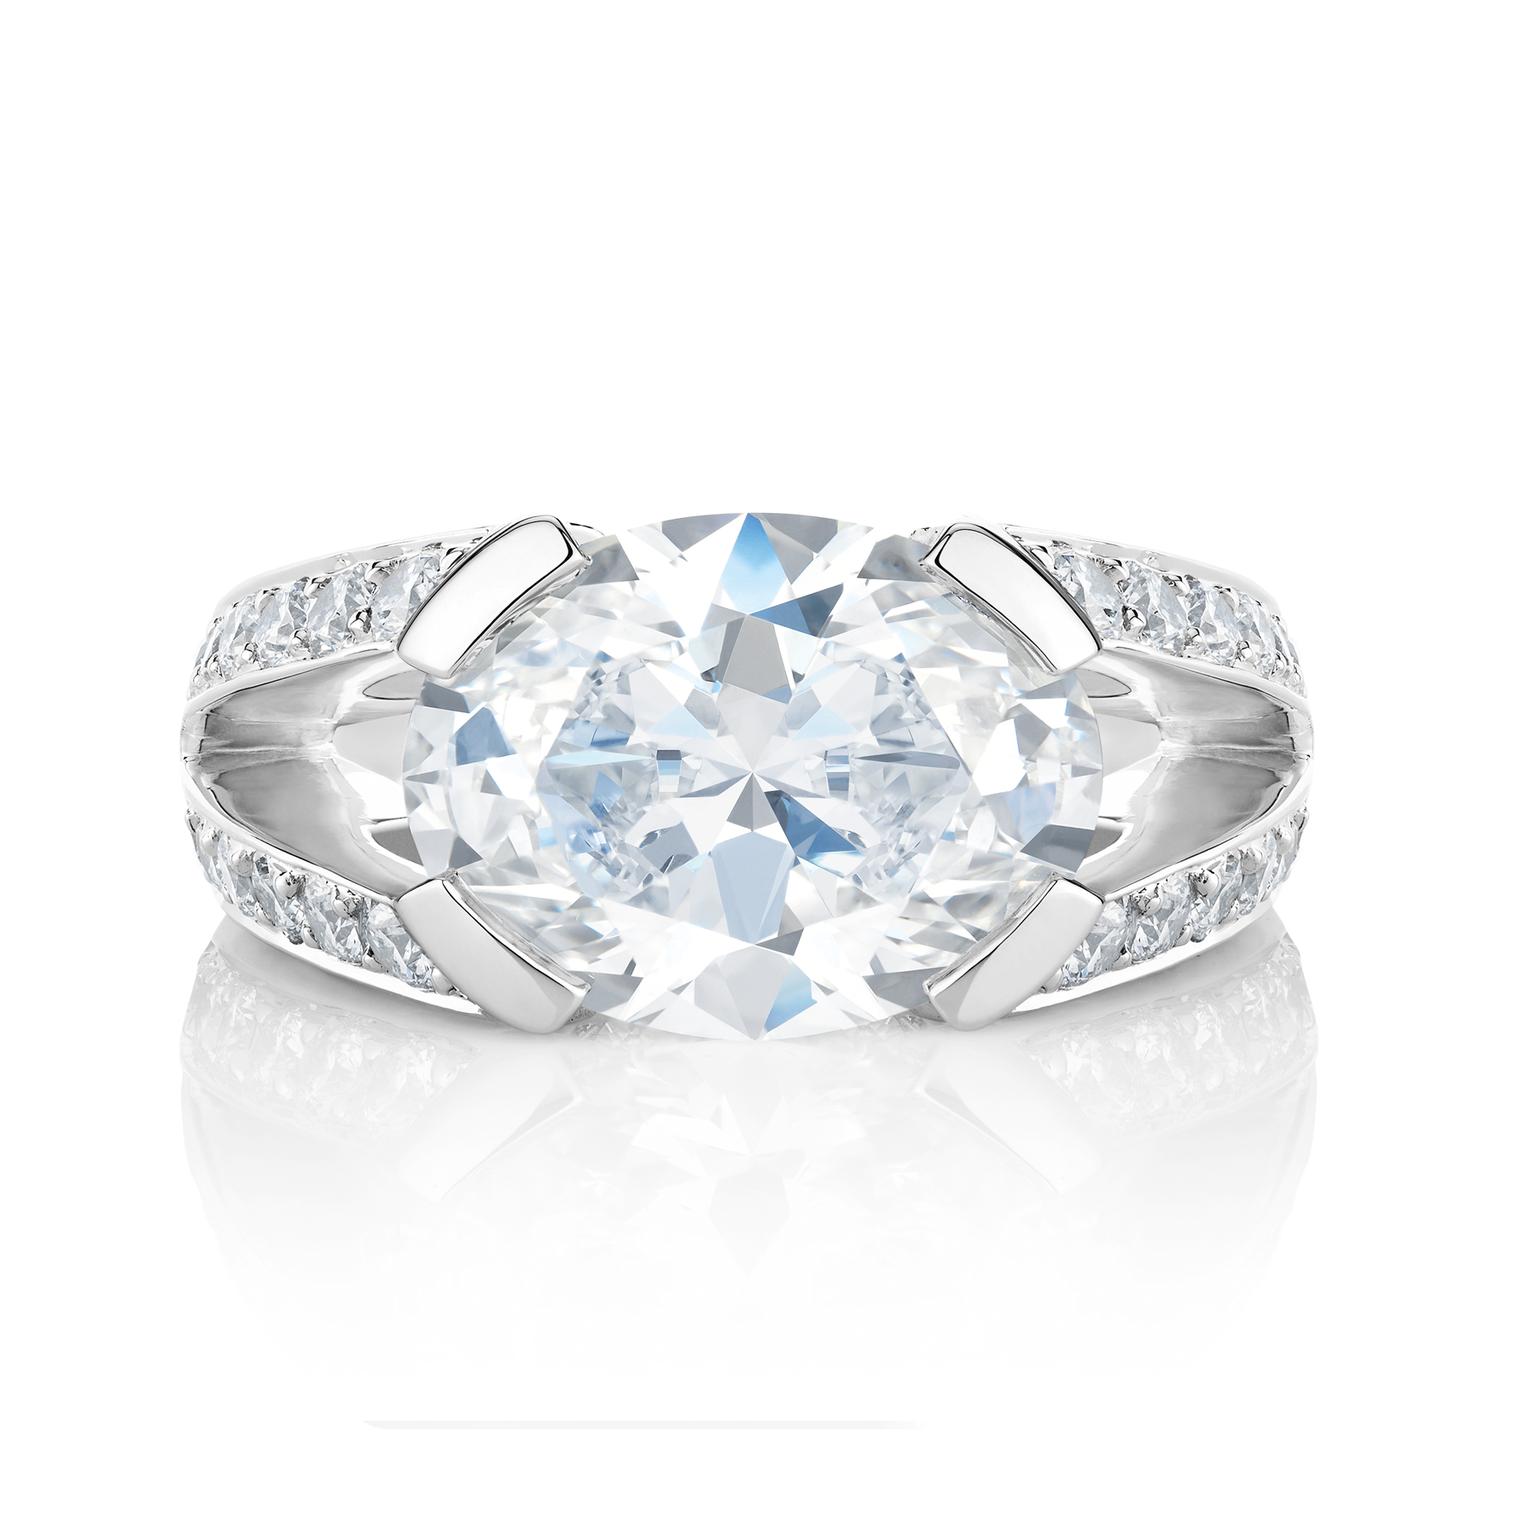 De Beers Annabel oval diamond engagement ring